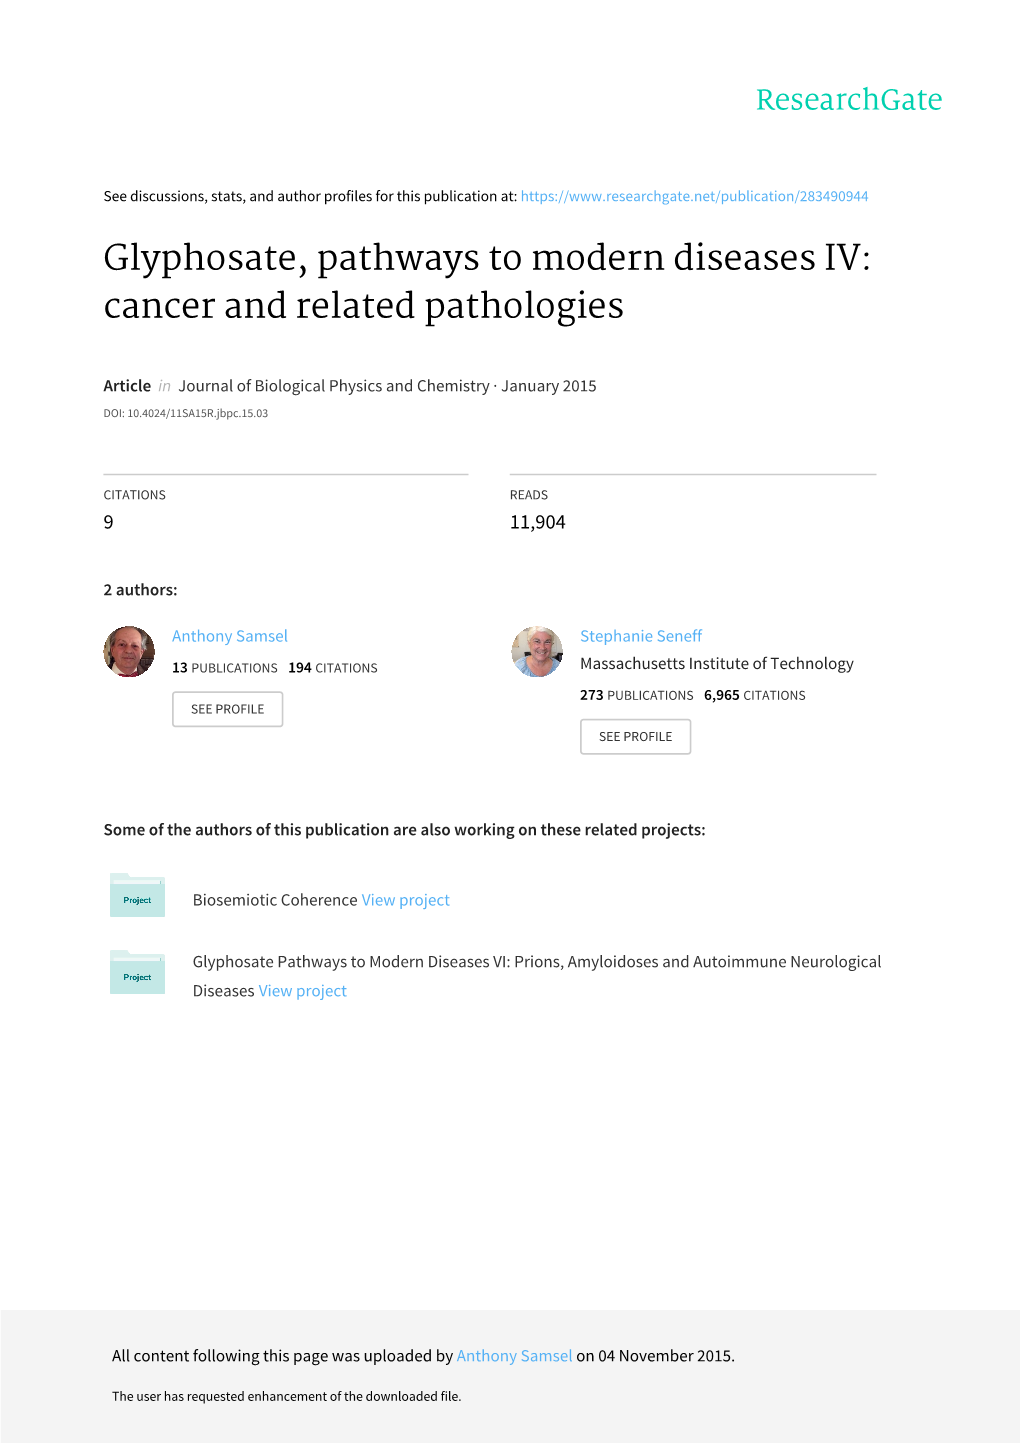 Glyphosate, Pathways to Modern Diseases IV: Cancer and Related Pathologies